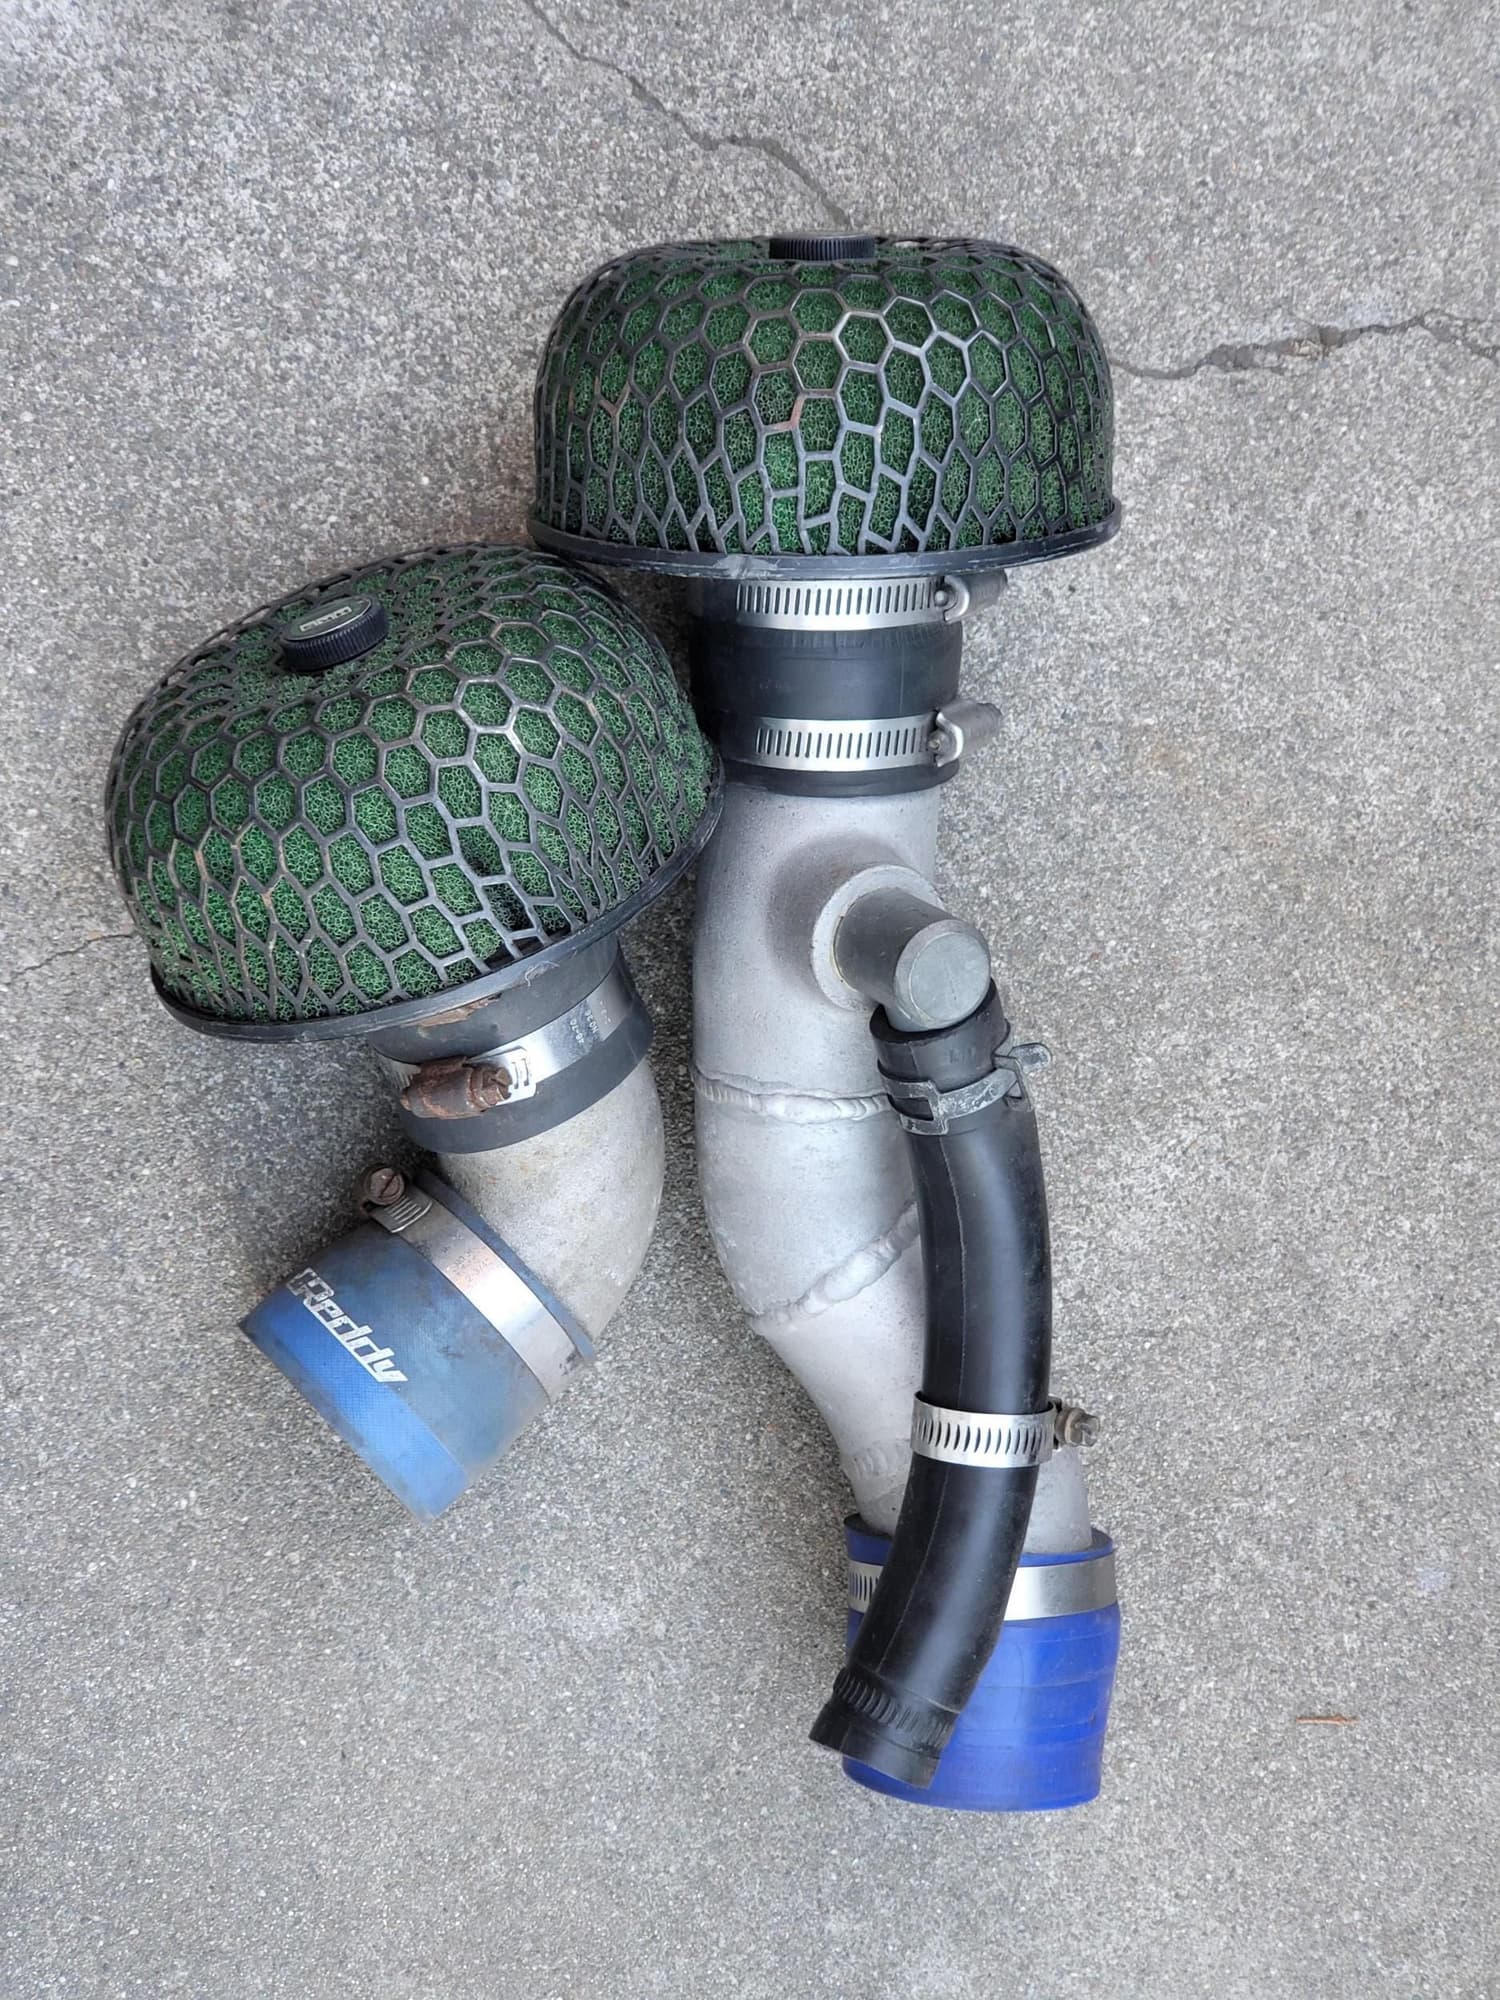 Engine - Intake/Fuel - Efini Y-pipe, aftermarket compression elbow, intake, and more! - Used - 1993 to 2002 Mazda RX-7 - San Mateo, CA 94401, United States